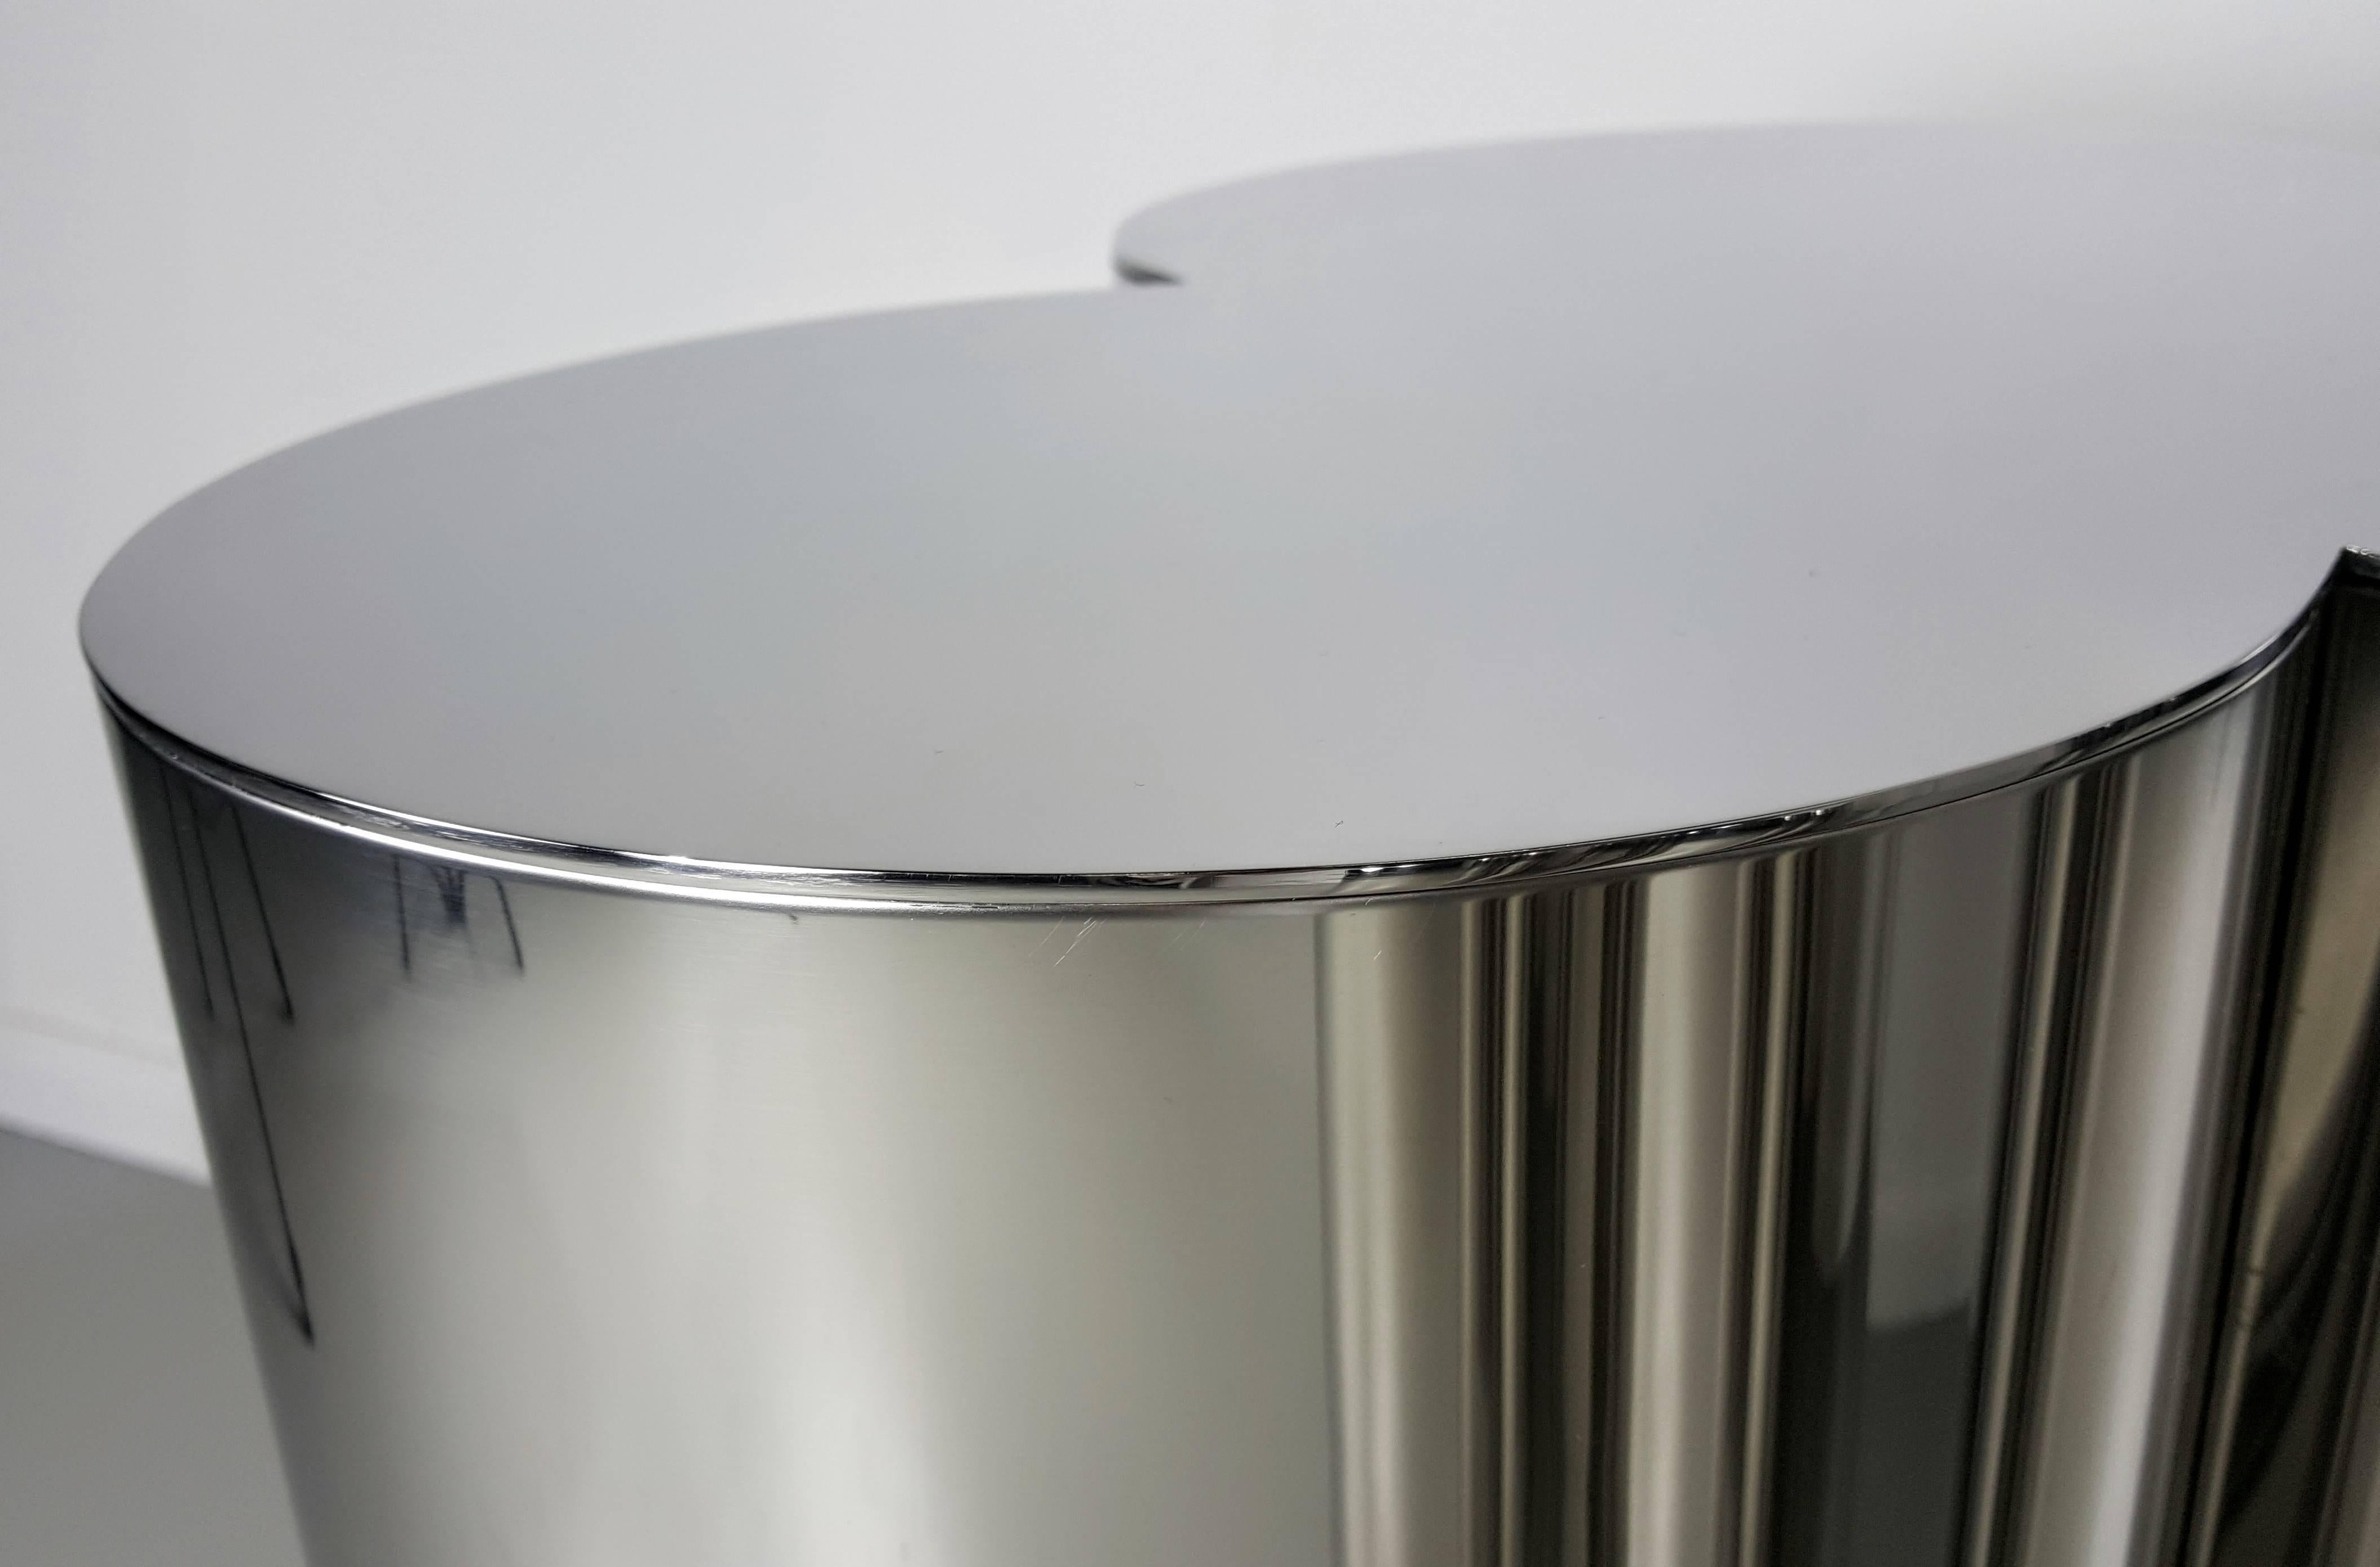 American Custom Trefoil Dining Table Pedestal Bases in Mirror Polished Stainless Steel